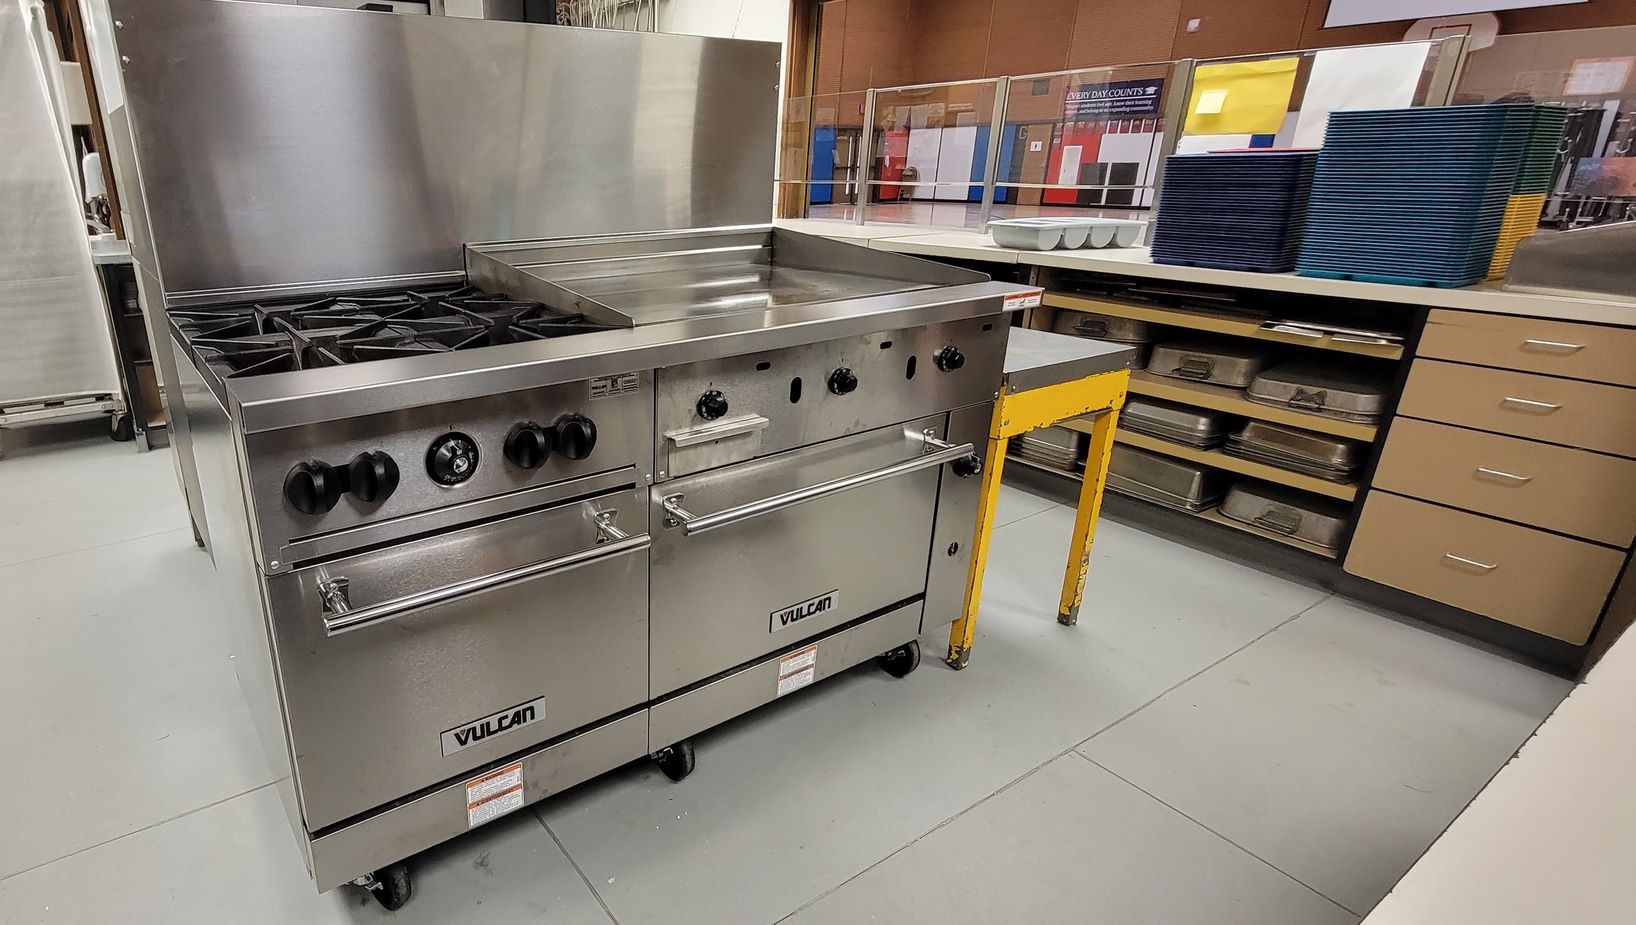 One industrial sized kitchen equipment of four burners with griddle and two ovens